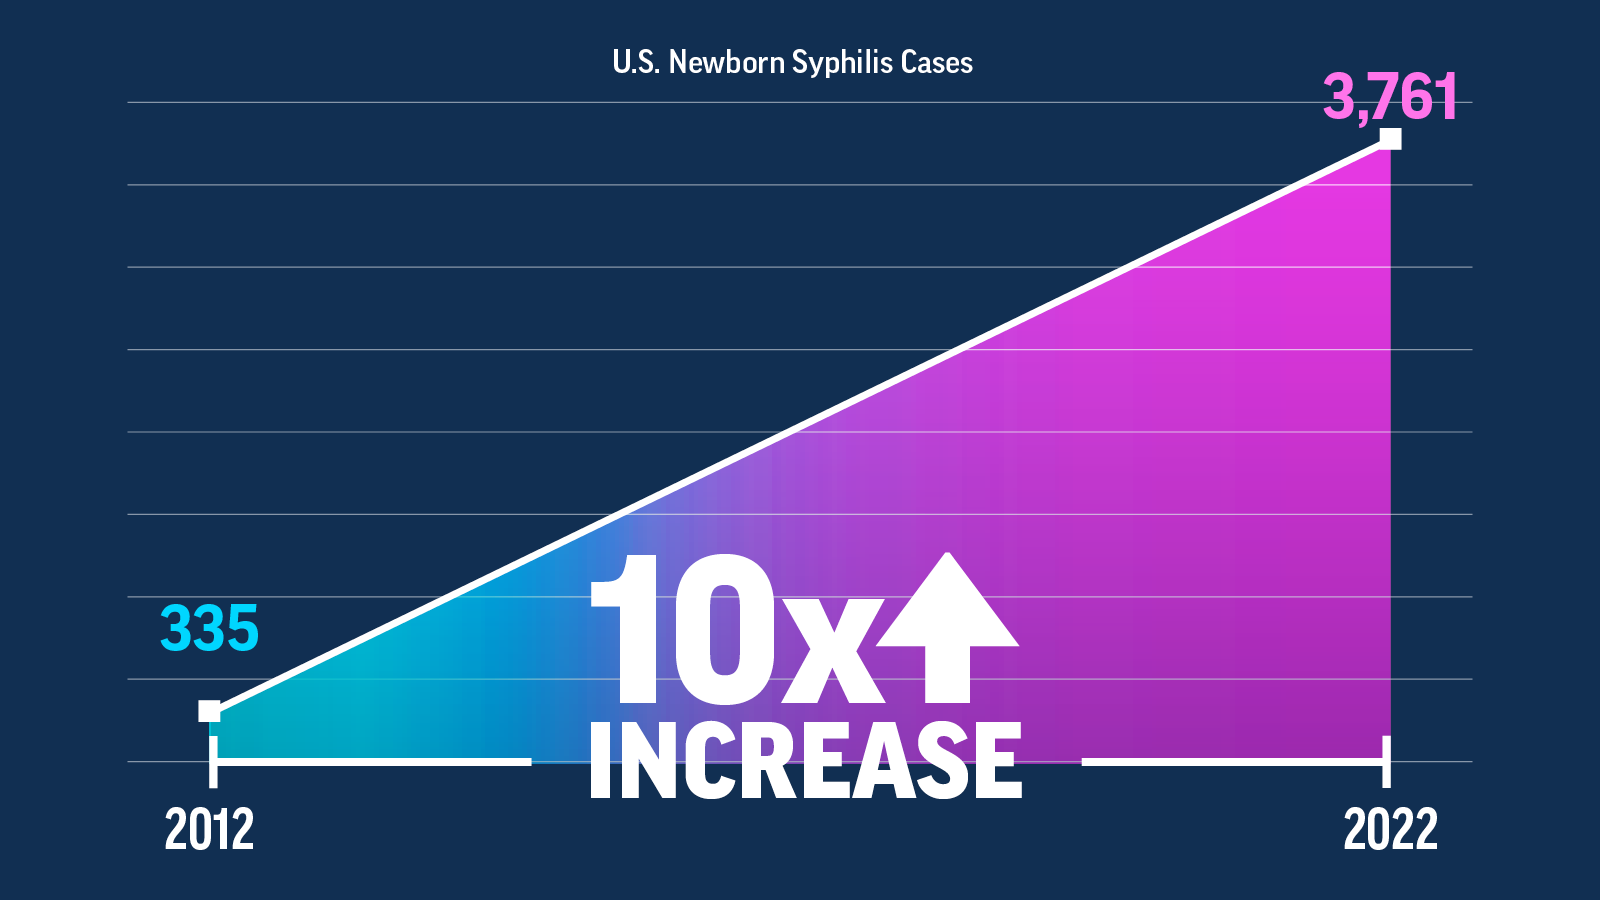 Infographic 1: Over 10 Times as Many Babies Were Born with Syphilis in 2022 than in 2012